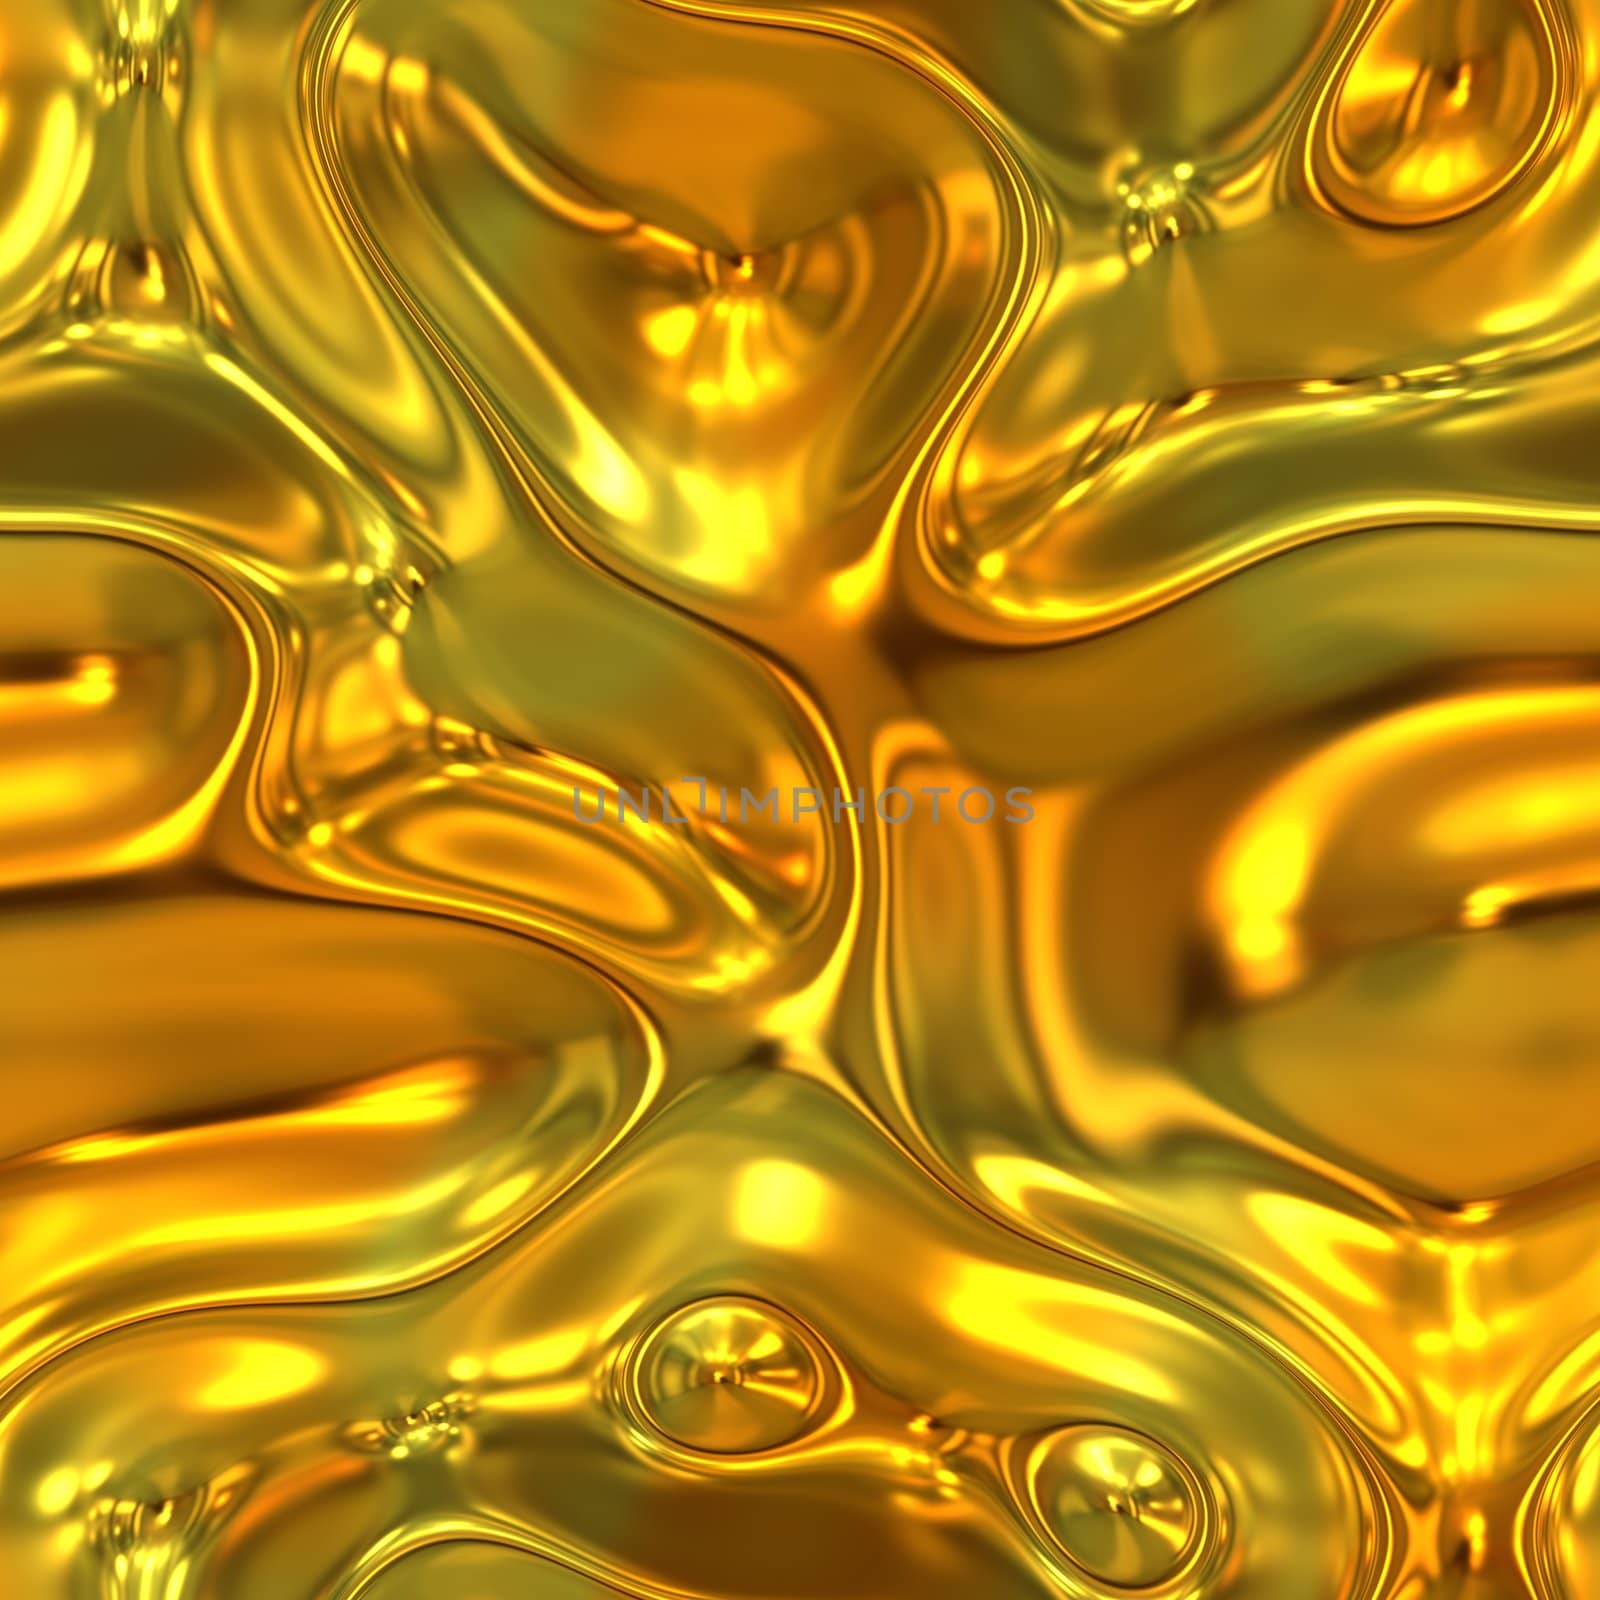 a large image of liquid or molten flowing gold 